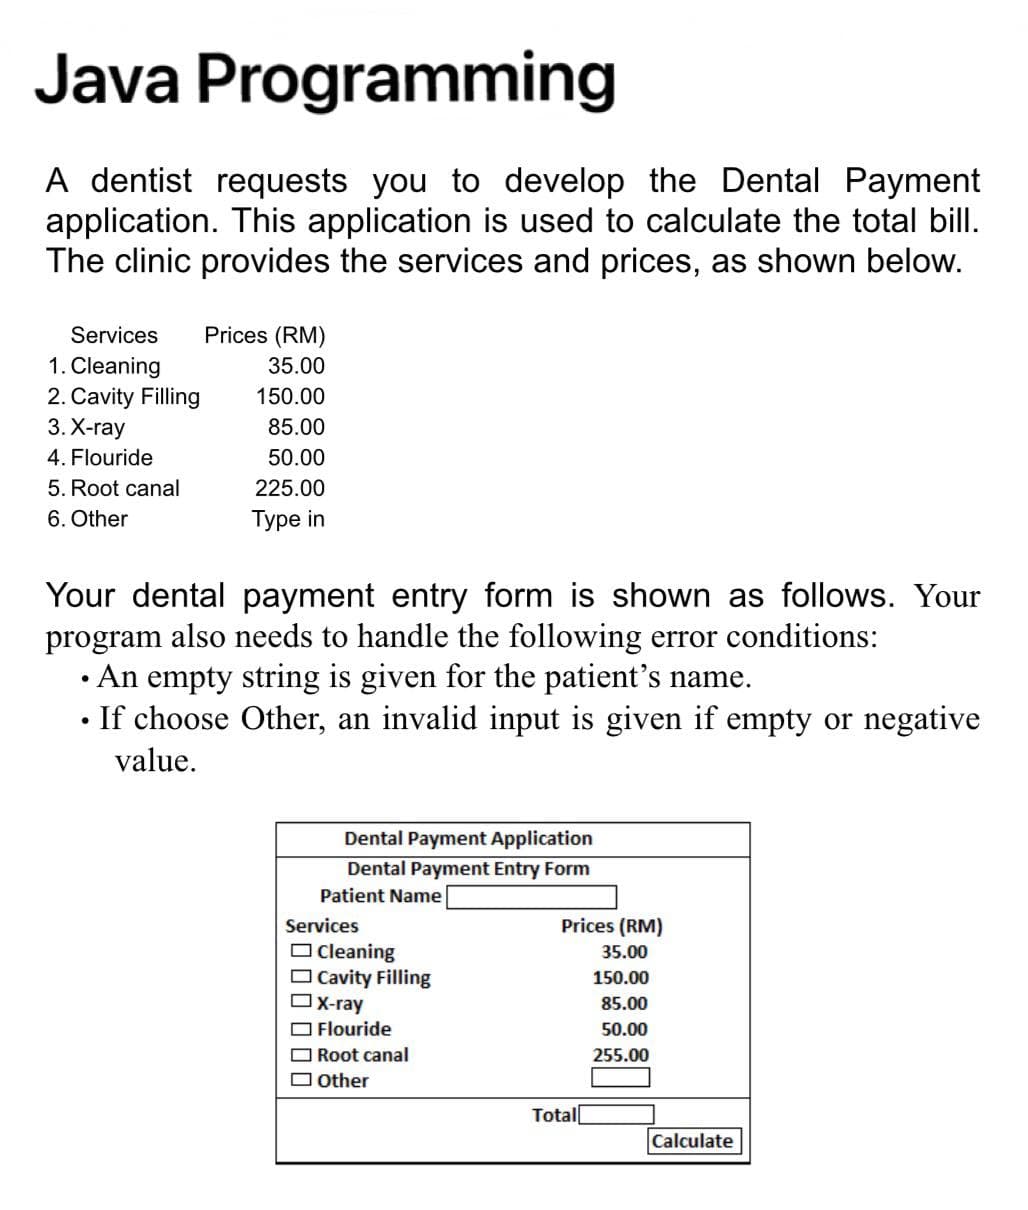 Java Programming
A dentist requests you to develop the Dental Payment
application. This application is used to calculate the total bill.
The clinic provides the services and prices, as shown below.
Services
Prices (RM)
1. Cleaning
35.00
2. Cavity Filling
150.00
3. Х-гаy
85.00
4. Flouride
50.00
5. Root canal
225.00
6. Other
Турe in
Your dental payment entry form is shown as follows. Your
program also needs to handle the following error conditions:
• An empty string is given for the patient's name.
If choose Other, an invalid input is given if empty or negative
value.
Dental Payment Application
Dental Payment Entry Form
Patient Name
Services
Prices (RM)
O cleaning
Cavity Filling
X-ray
O Flouride
35.00
150.00
85.00
50.00
Root canal
255.00
O Other
Total[
Calculate
